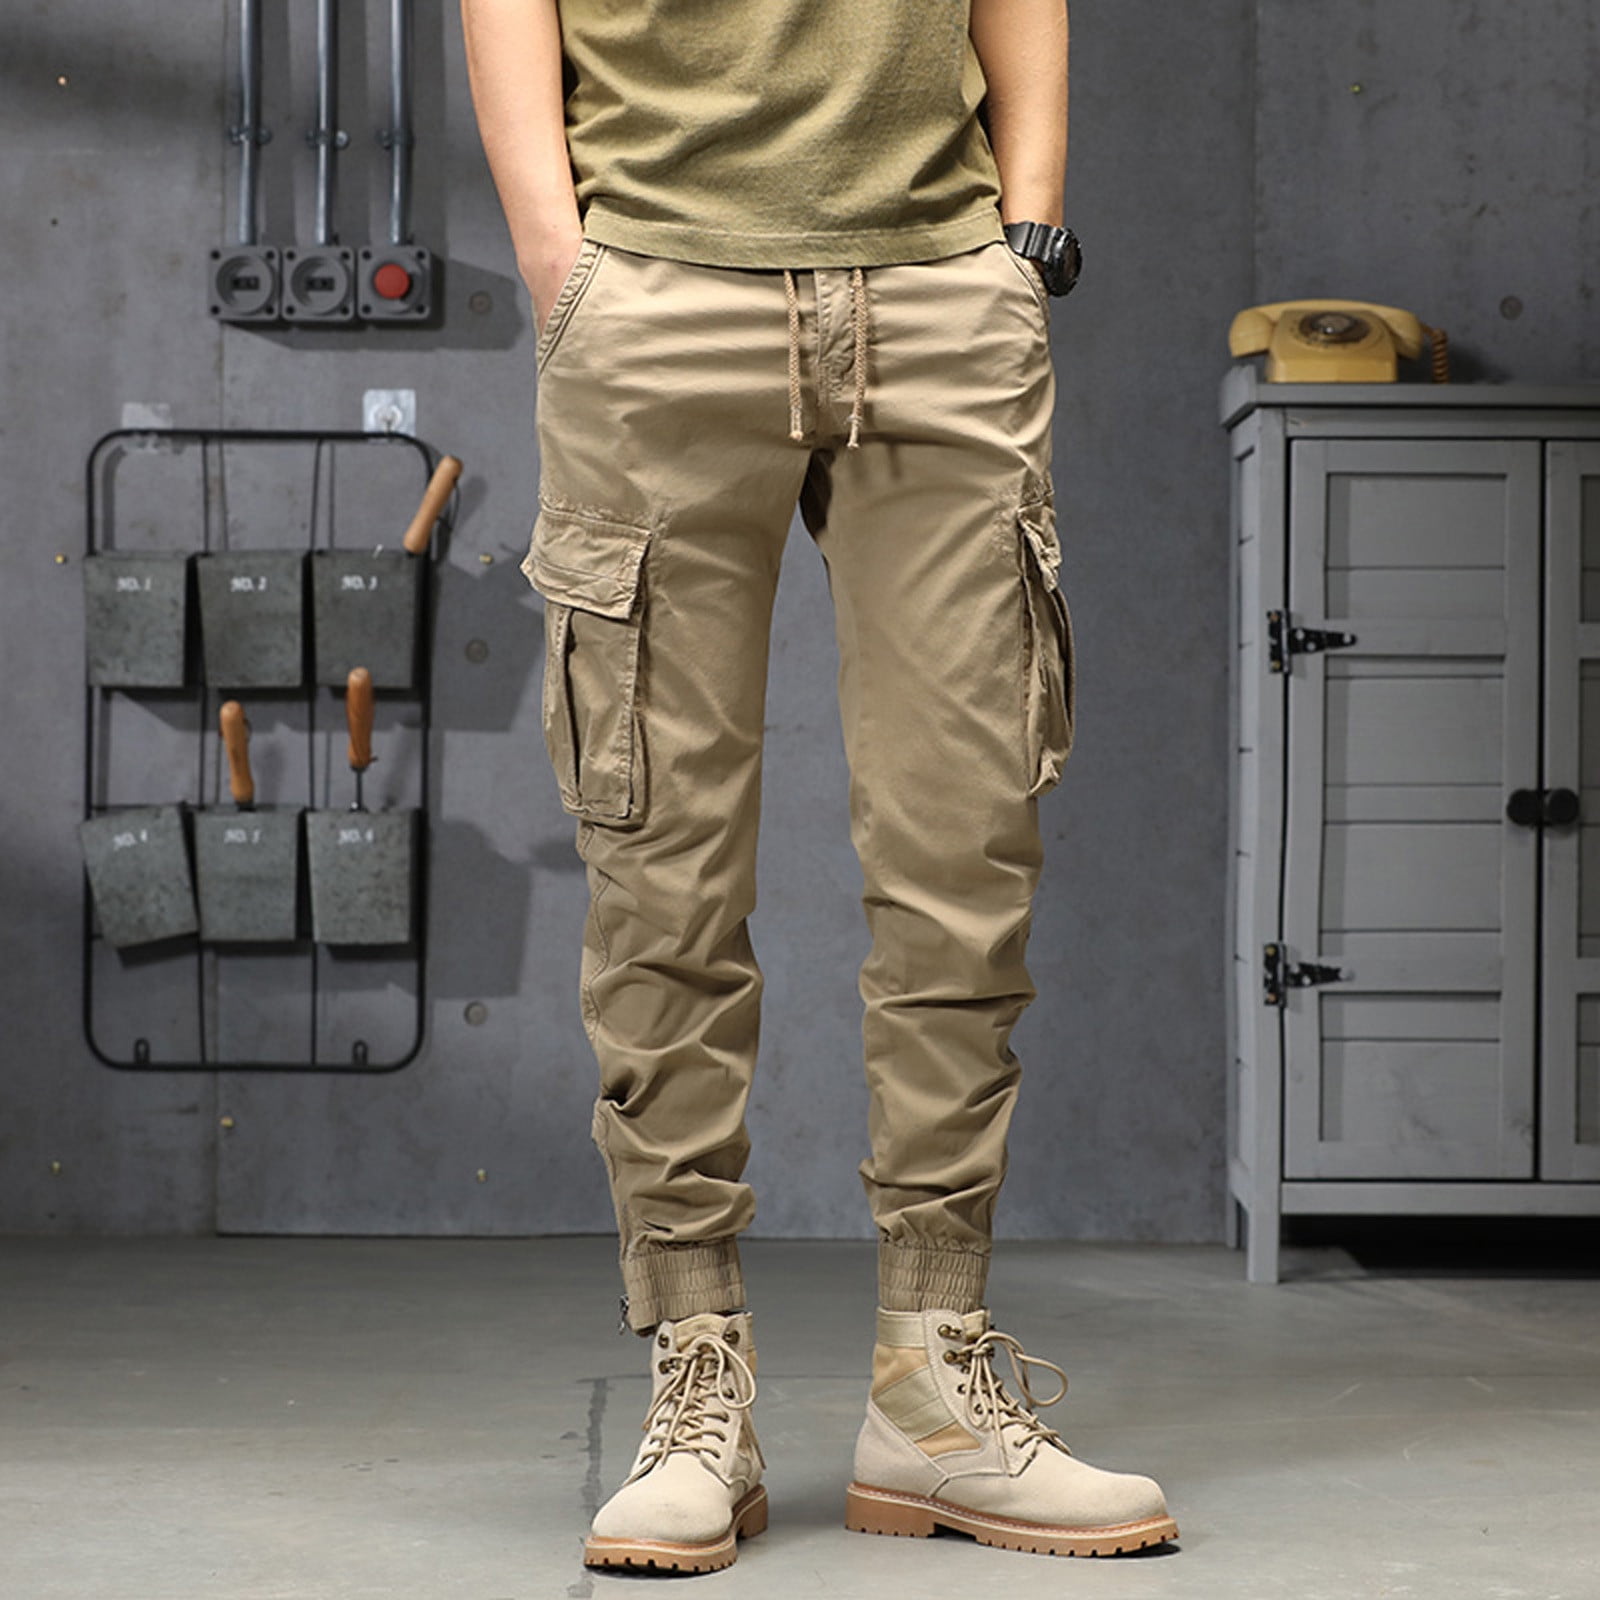 Mens Fashion Casual Loose Cotton Plus Size Pocket Lace Up Elastic Waist  Pants Trousers 42x29 Mens Pants Nonslip Band Big And Tall Pants Warm And  Tote